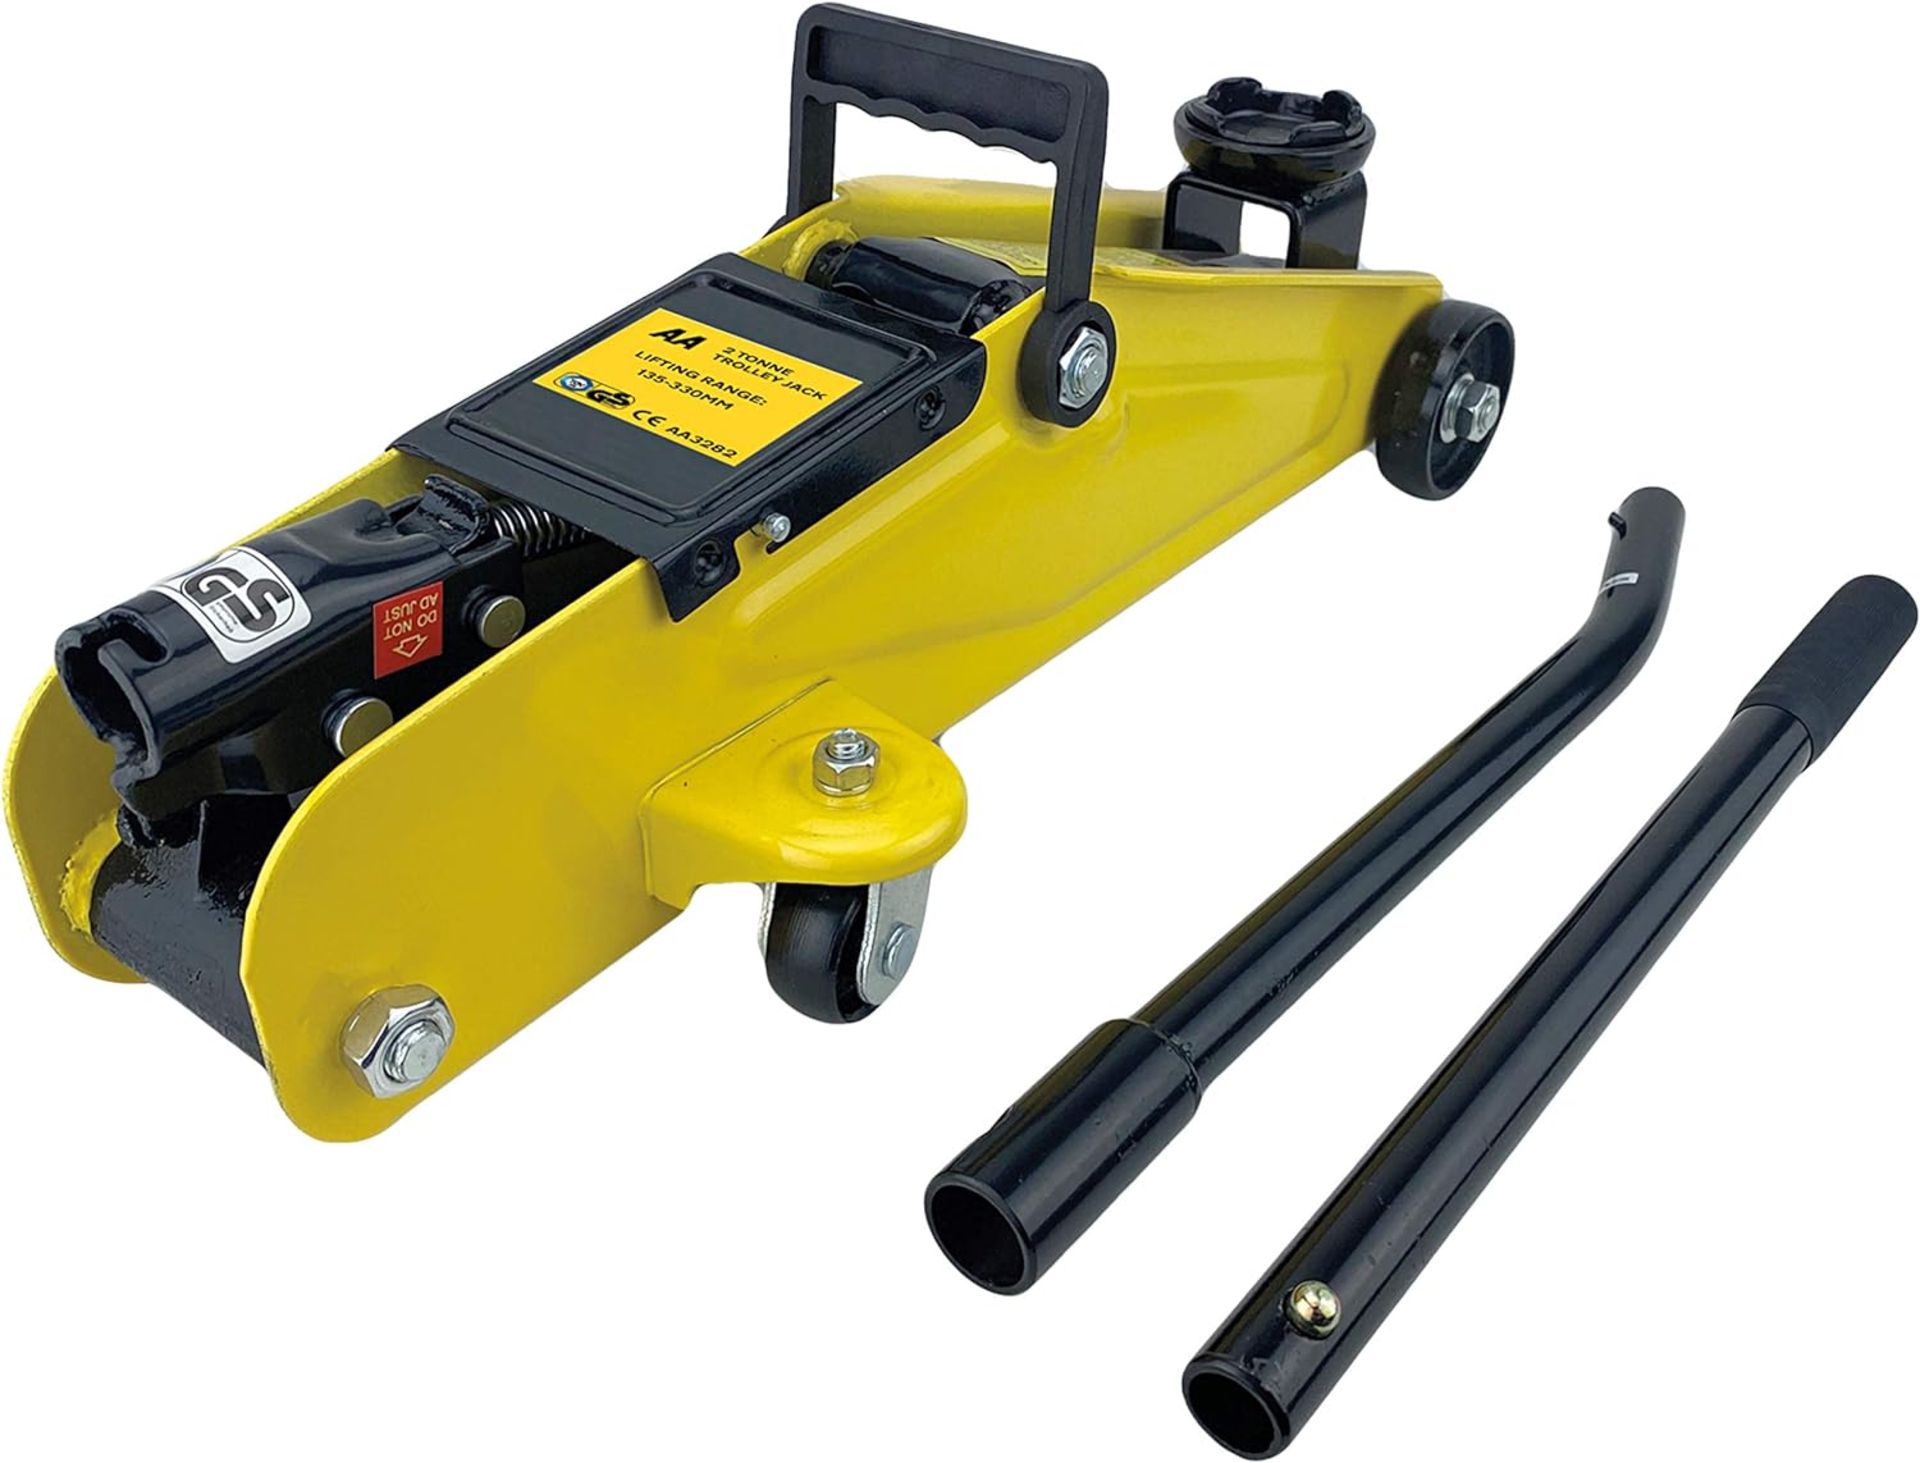 2 Tonne Trolley Jack AA3282 Lifting Range For Cars Vehicles TUV/GS Approved Lot#500